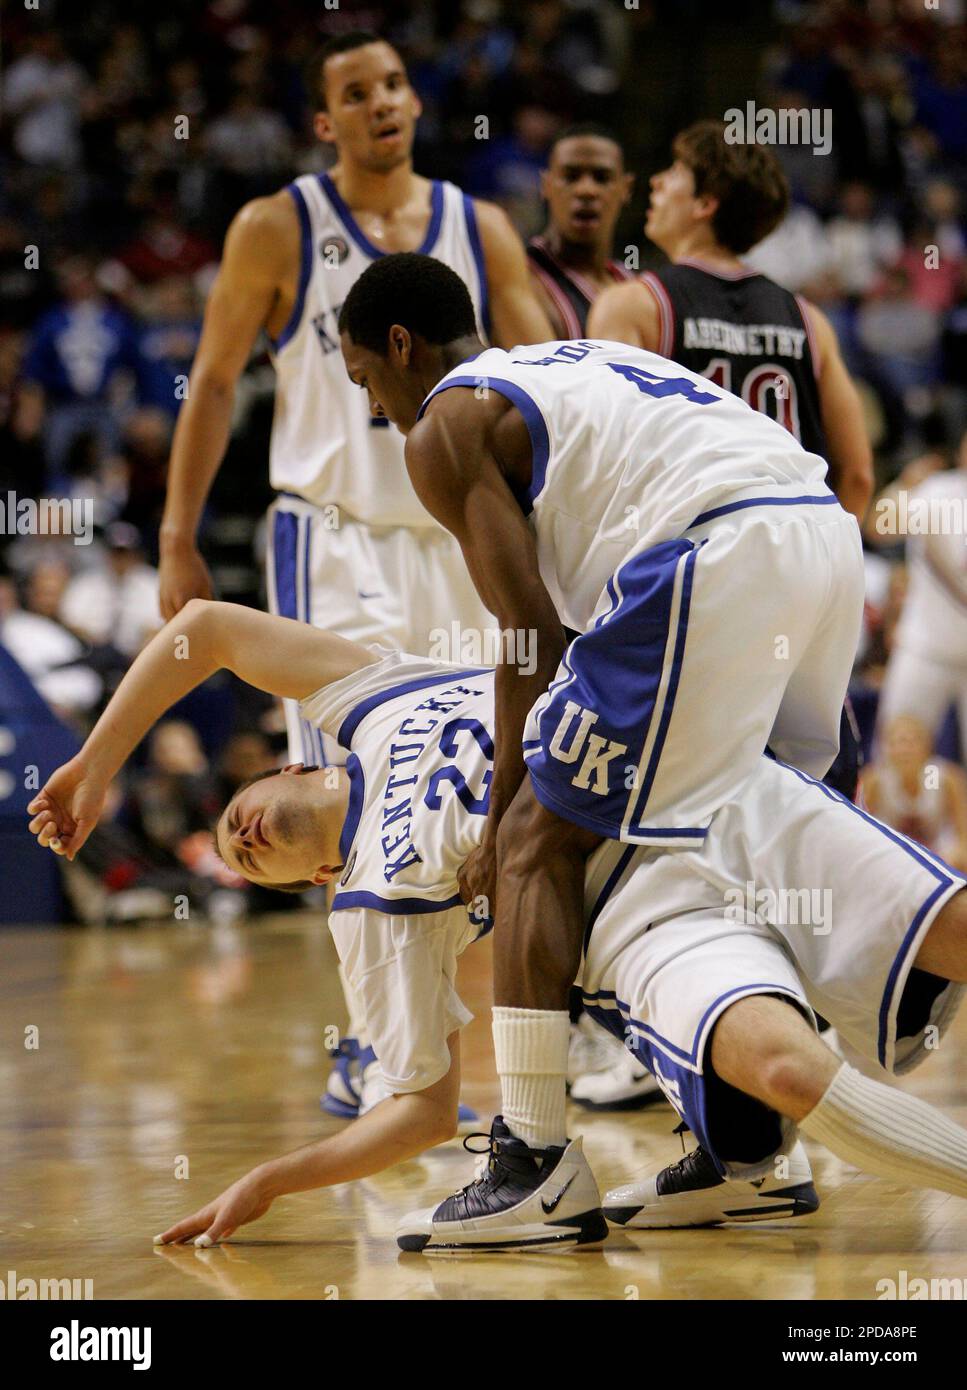 kentuckys-rajon-rondo-right-picks-up-teammate-patrick-sparks-after-sparks-committed-a-foul-during-the-first-half-against-mississippi-at-the-2006-southeastern-conference-basketball-tournament-thursday-march-9-2006-at-the-gaylord-entertainment-center-in-nashville-tenn-ap-photojohn-bazemore-2PDA8PE.jpg